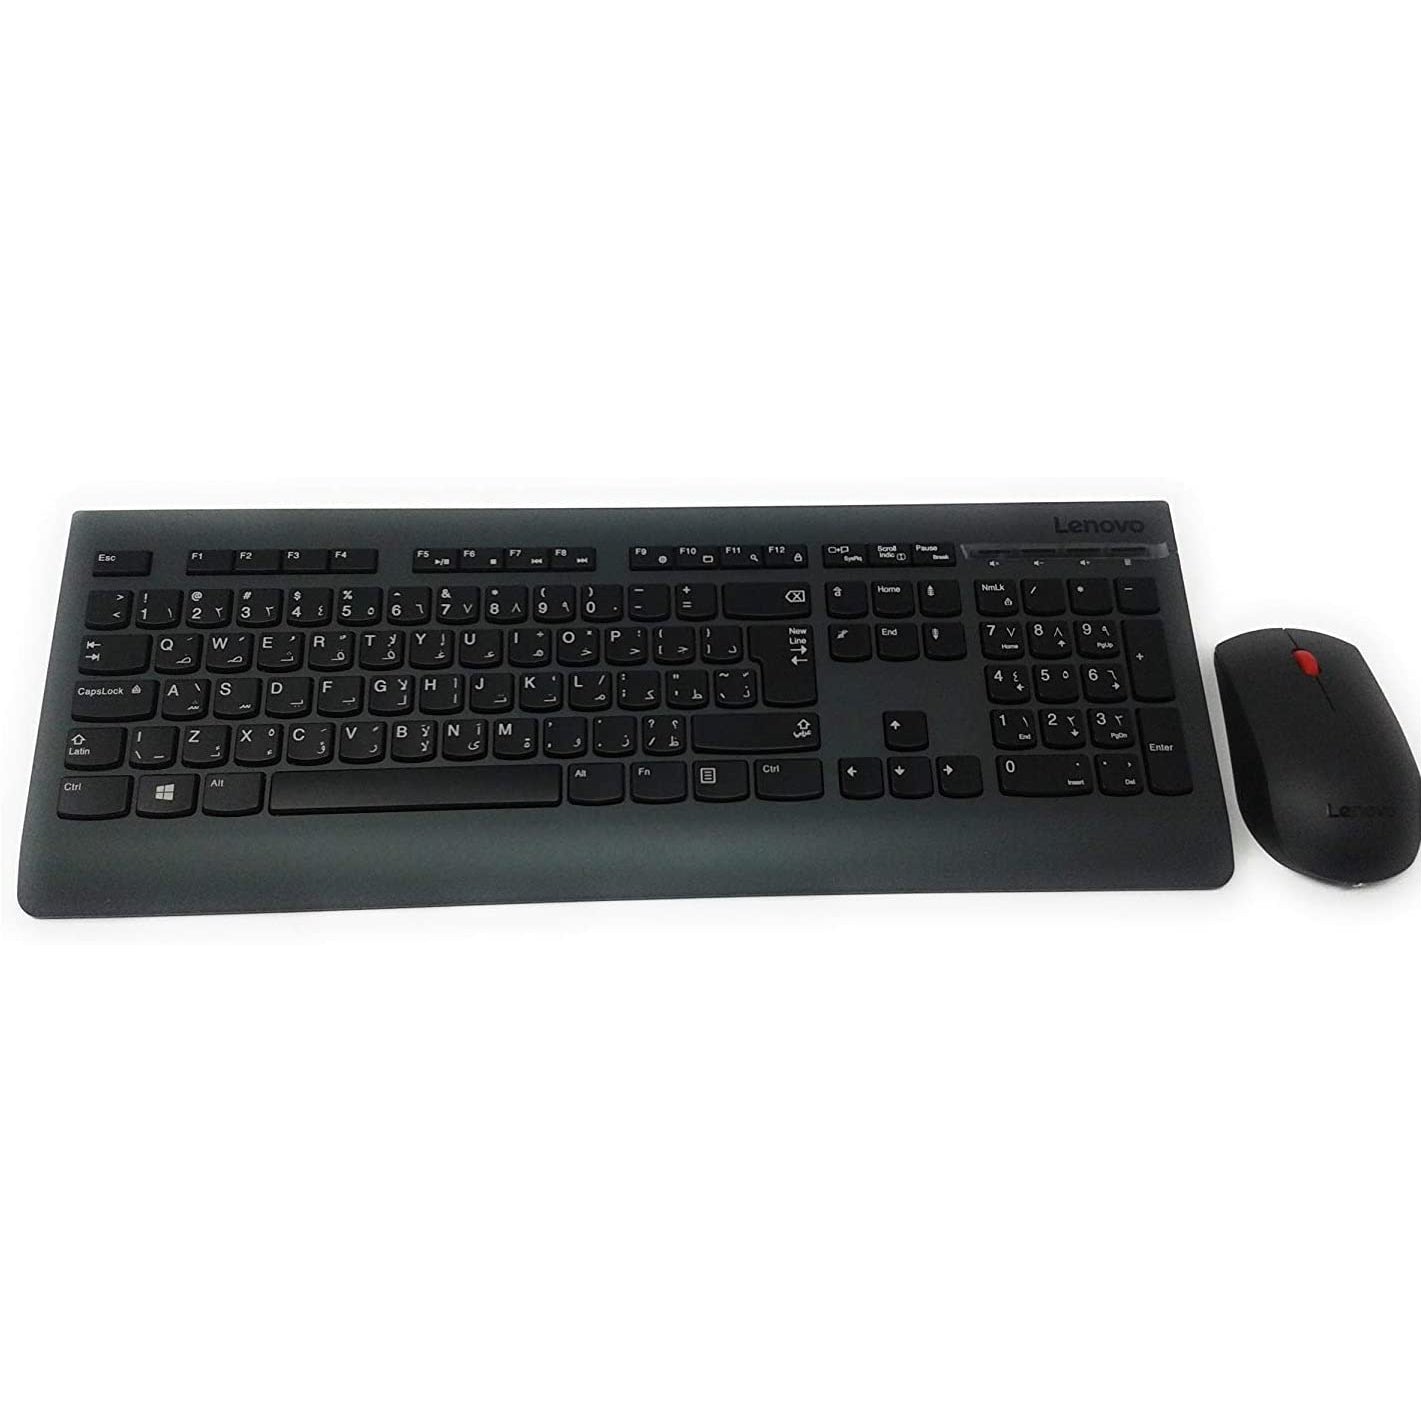 Lenovo 4X30M39496 Essential Wireless Keyboard and Mouse Combo - Black - Refurbished Excellent